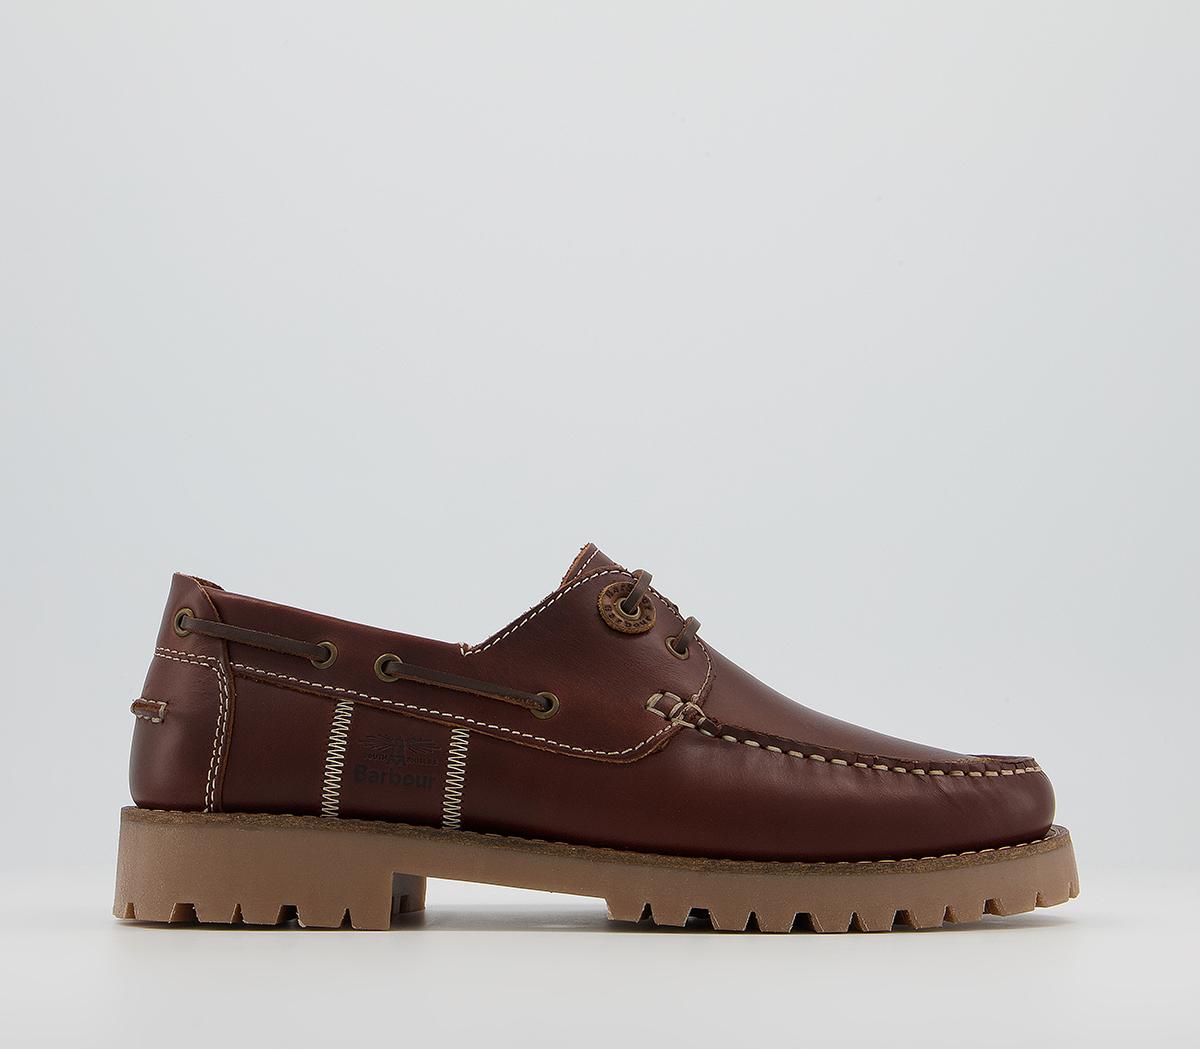 Barbour Stern Boat Shoes Mahogany - Men's Casual Shoes